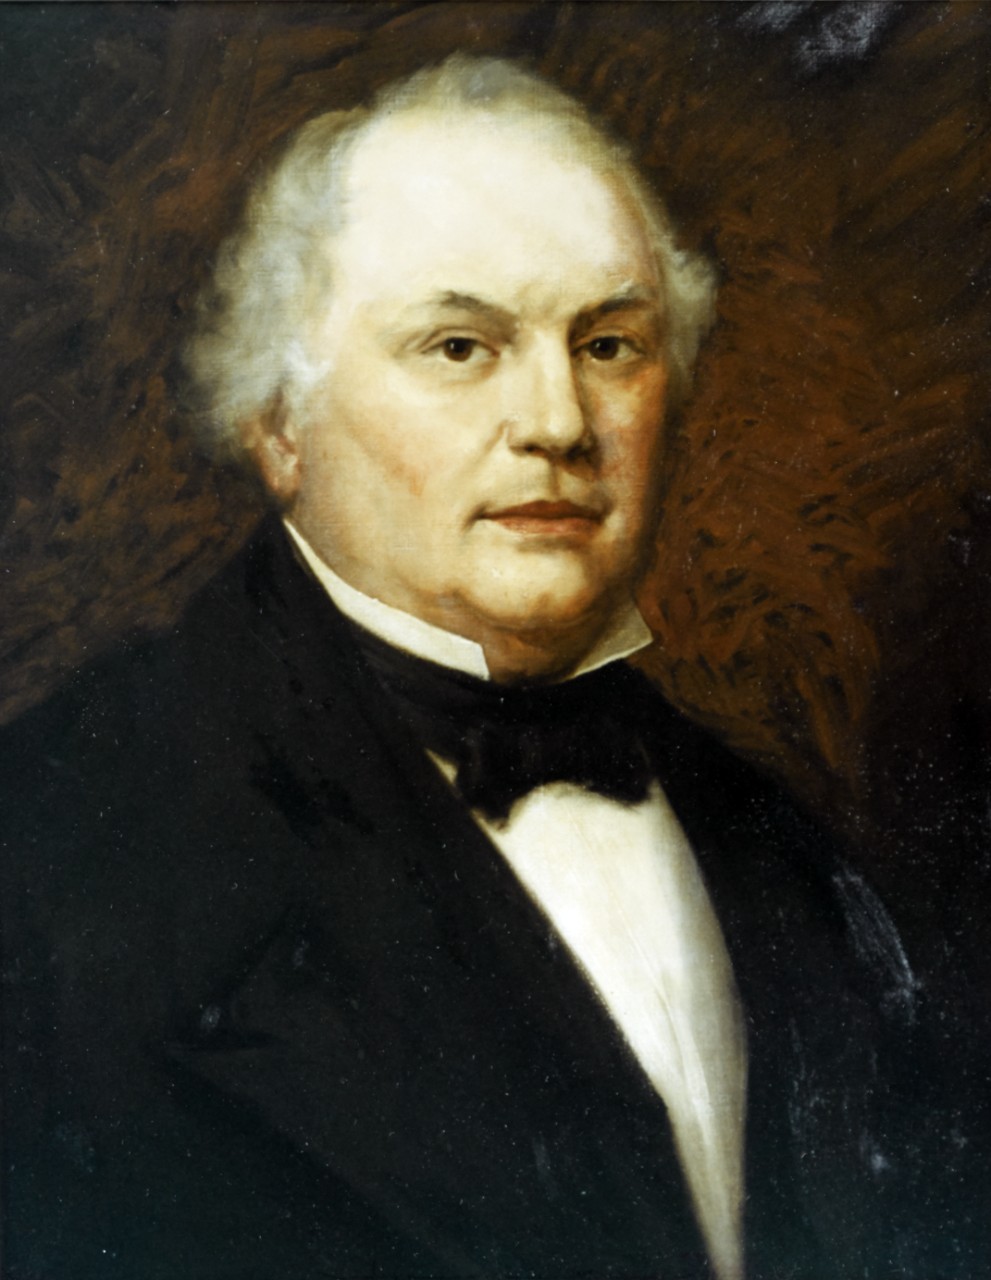 NH 54775-KN  John Y. Mason, Secretary of the Navy, 26 March 1844 - 10 March 1845, and 10 September 1846 - 7 March 1849